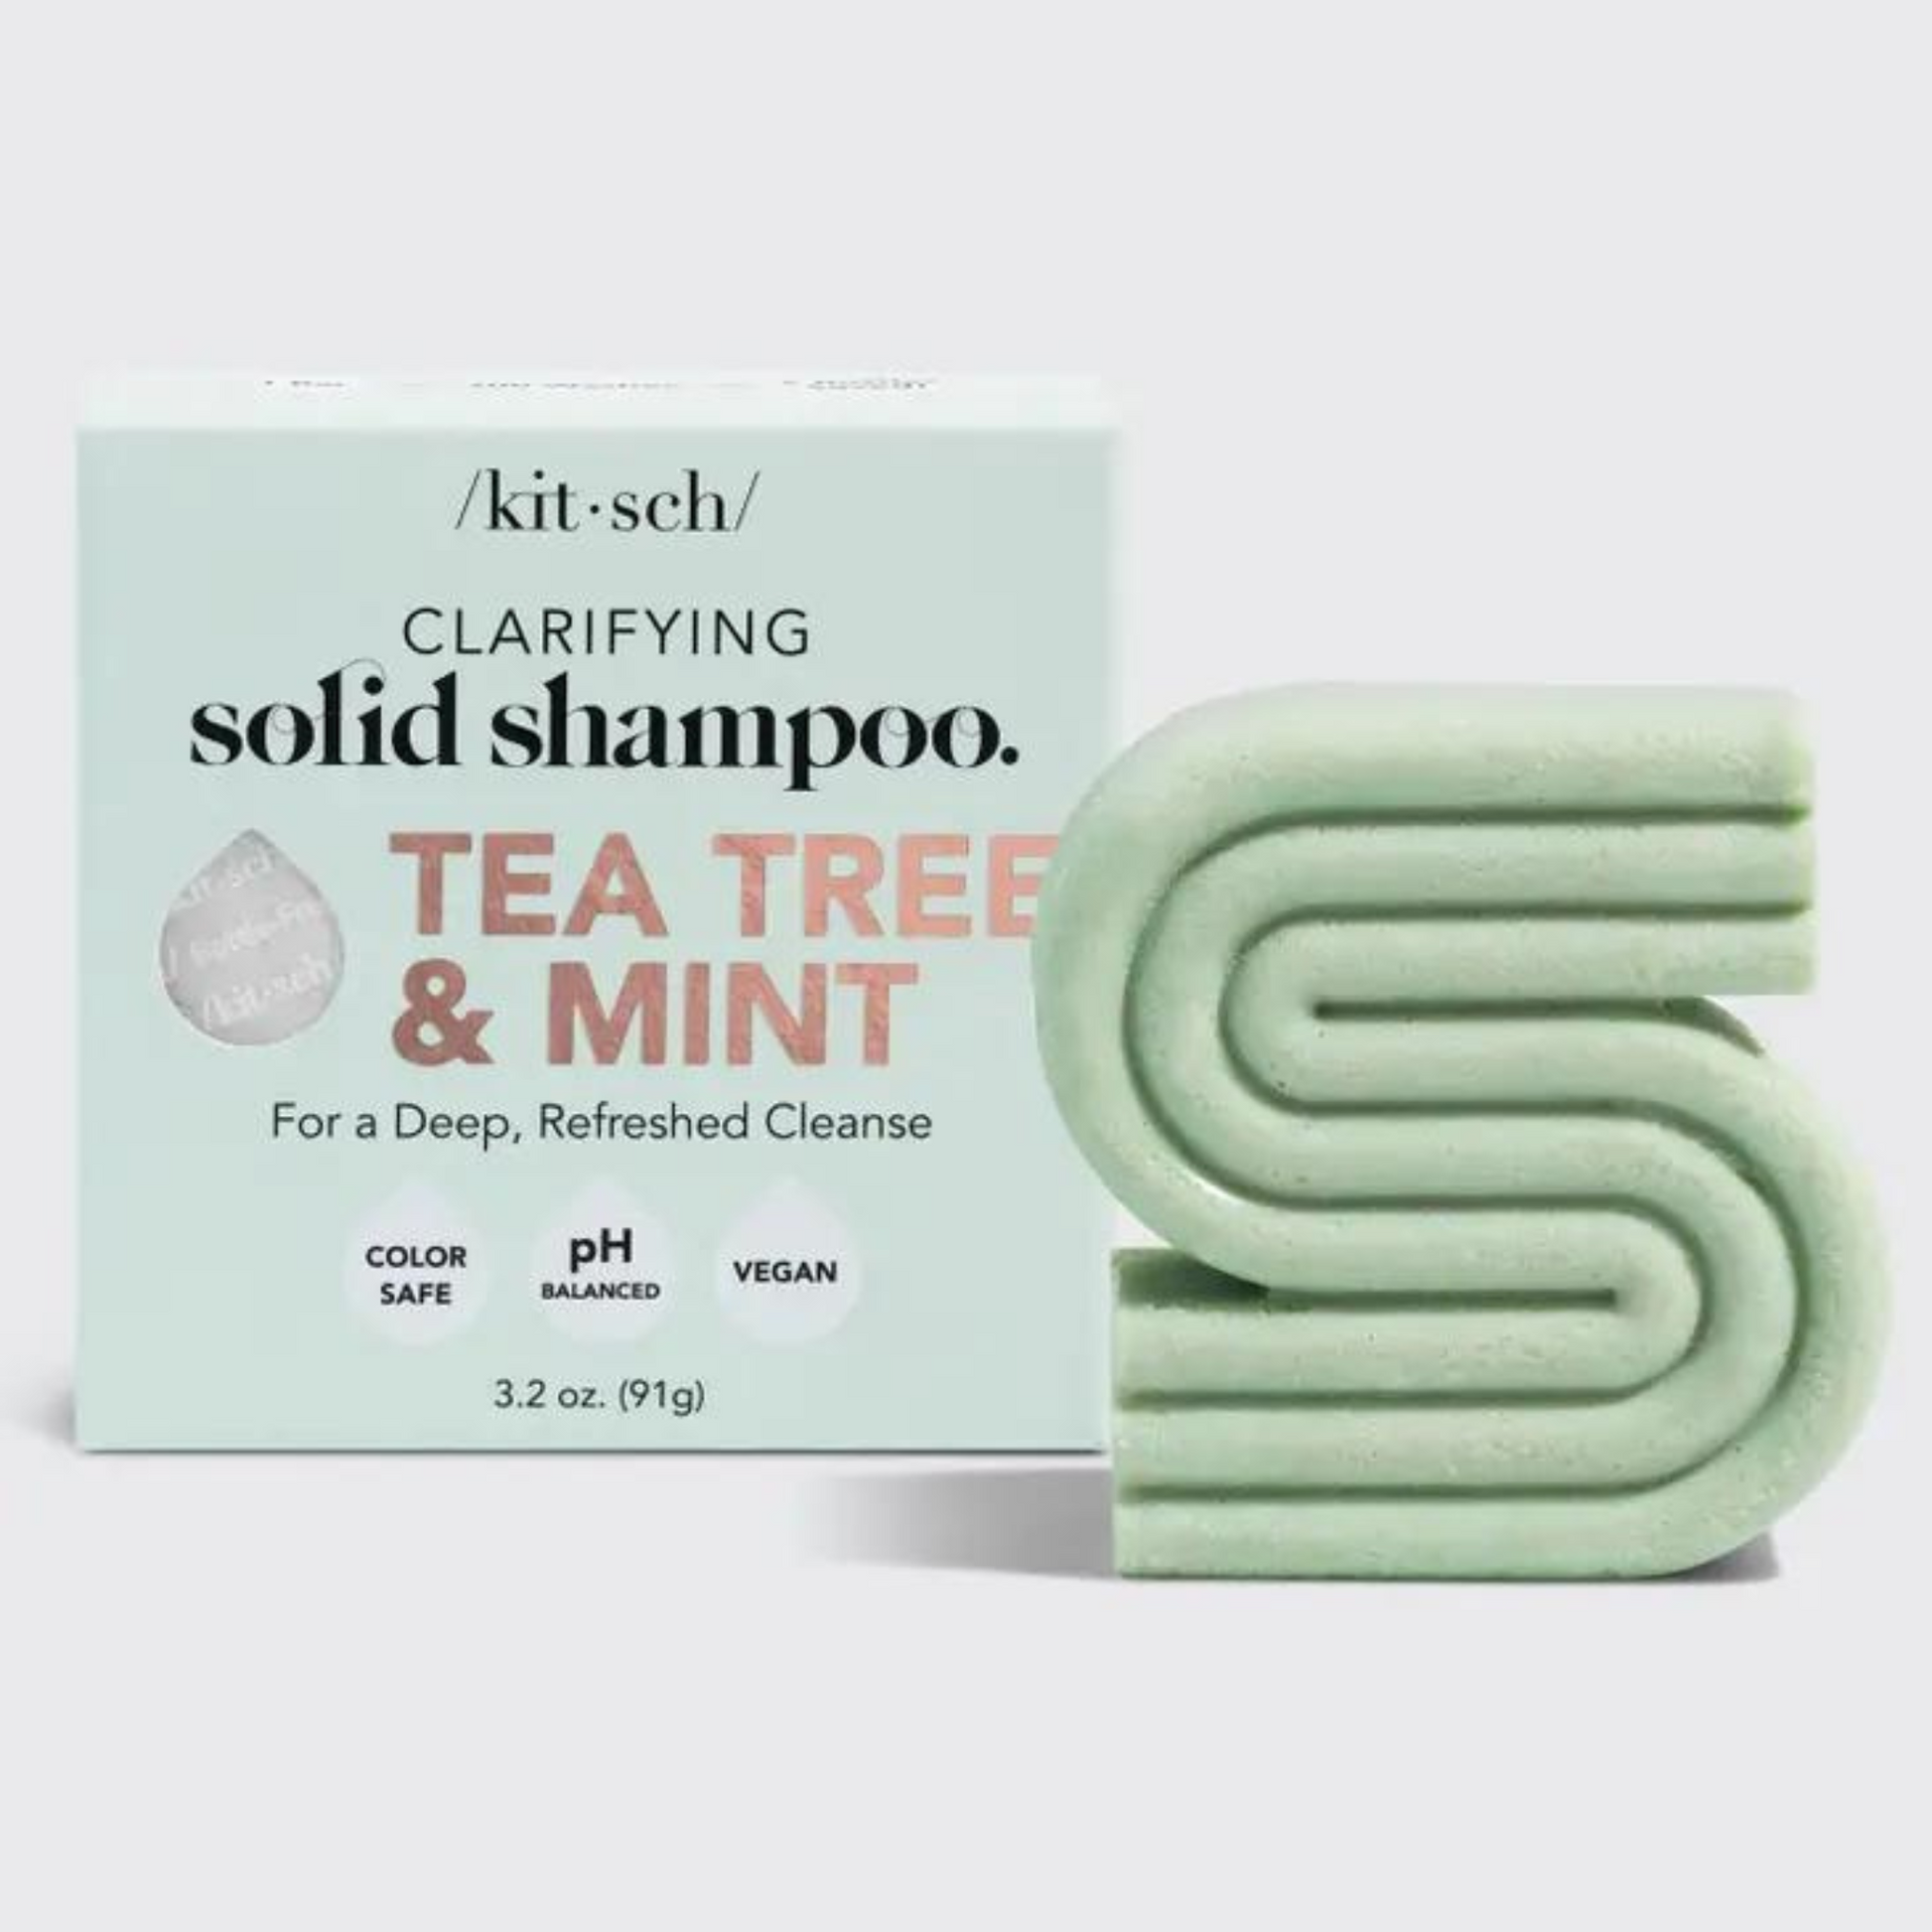 Experience a deep and effective cleanse with the Tea Tree + Mint Clarifying Shampoo Bar! Formulated with 2% Tea Tree Oil, it removes excess oil and buildup while tackling flakes and dryness for a healthy-looking scalp. Free of parabens, phthalates, silicones, sulfates, and artificial fragrances, it reduces two bottles of plastic single-use shampoo and conditioner, and is safe for color-treated hair.